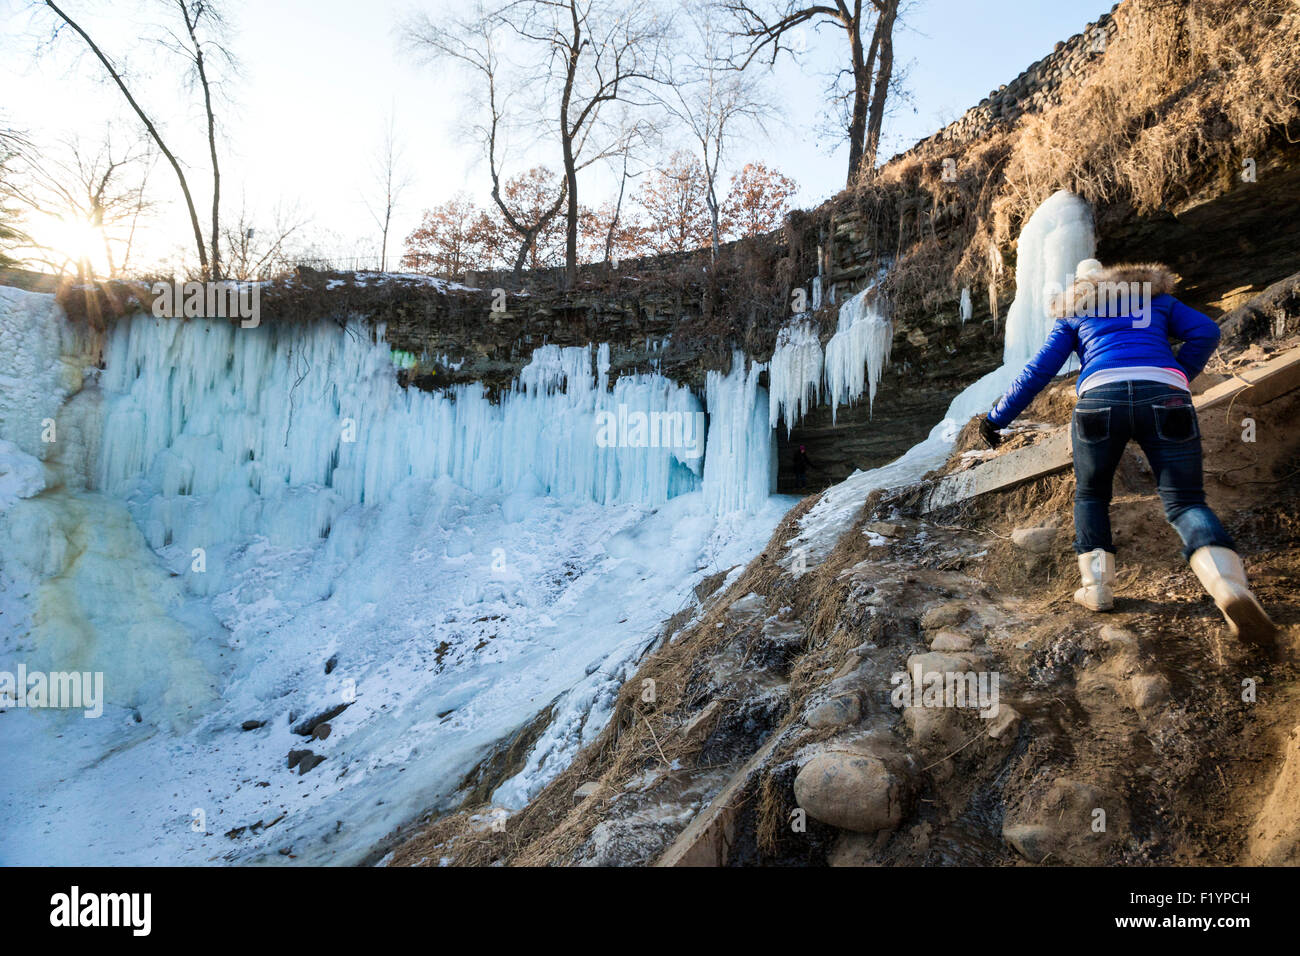 A woman in coat, gloves and boots hikes up slippery rocks to reach frozen Minnehaha Falls in winter, Minneapolis, MN, USA Stock Photo